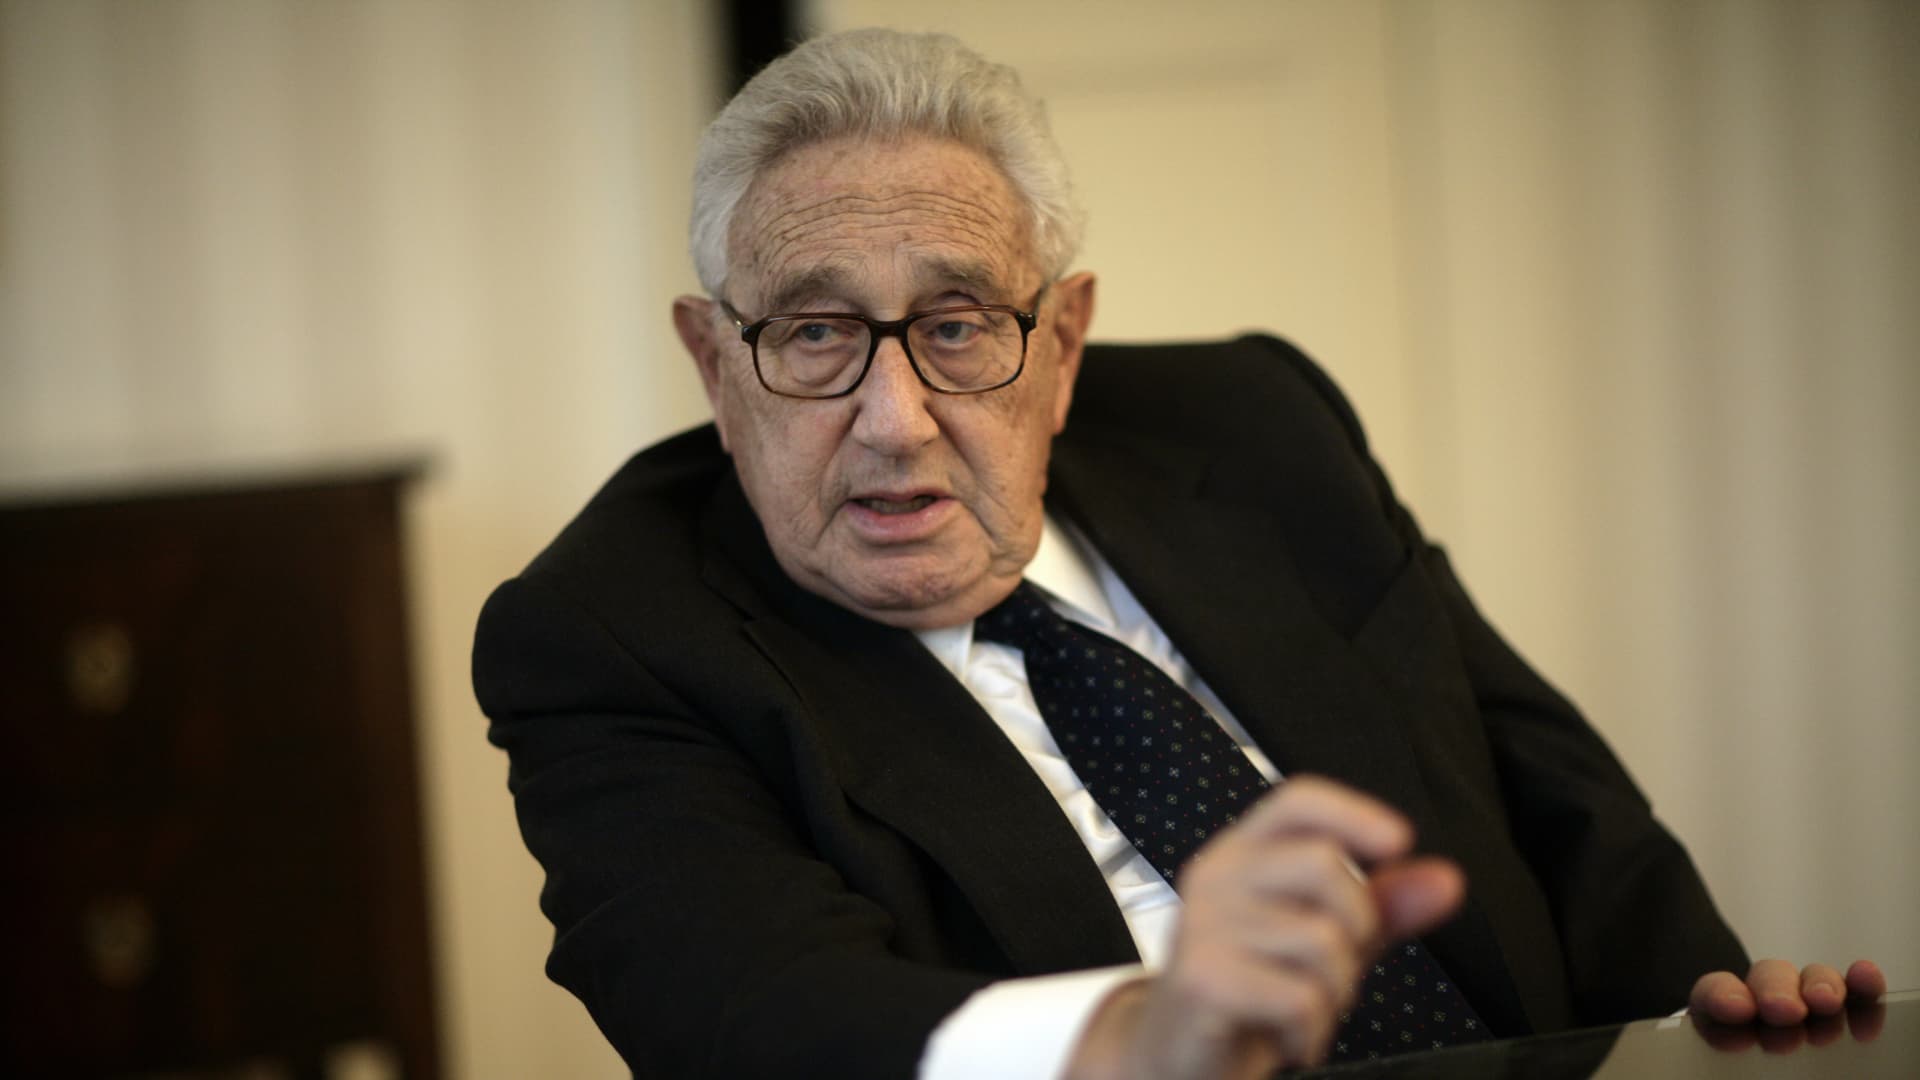 Henry Kissinger speaks during a 2007 interview in Washington.